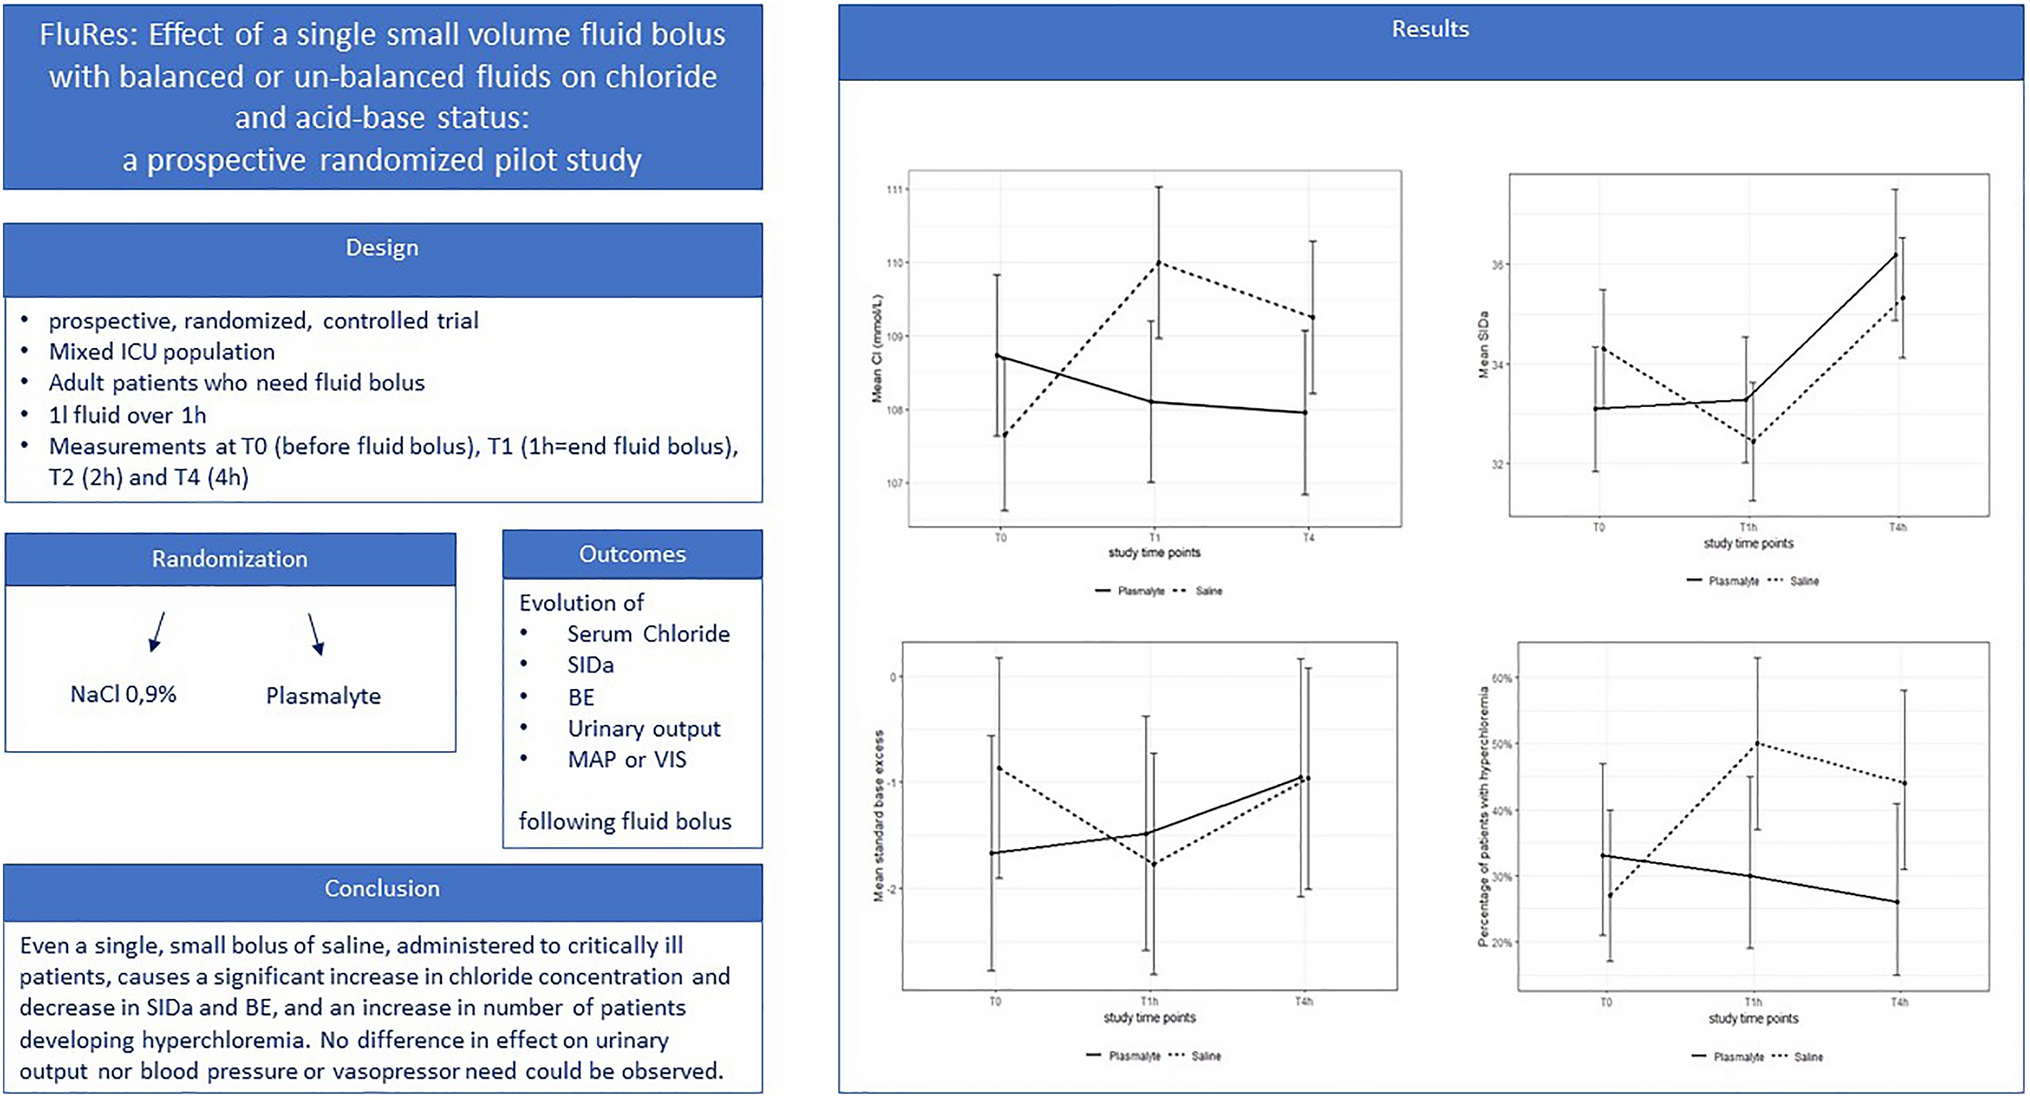 Effect of a single small volume fluid bolus with balanced or un-balanced fluids on chloride and acid–base status: a prospective randomized pilot study (the FLURES-trial)